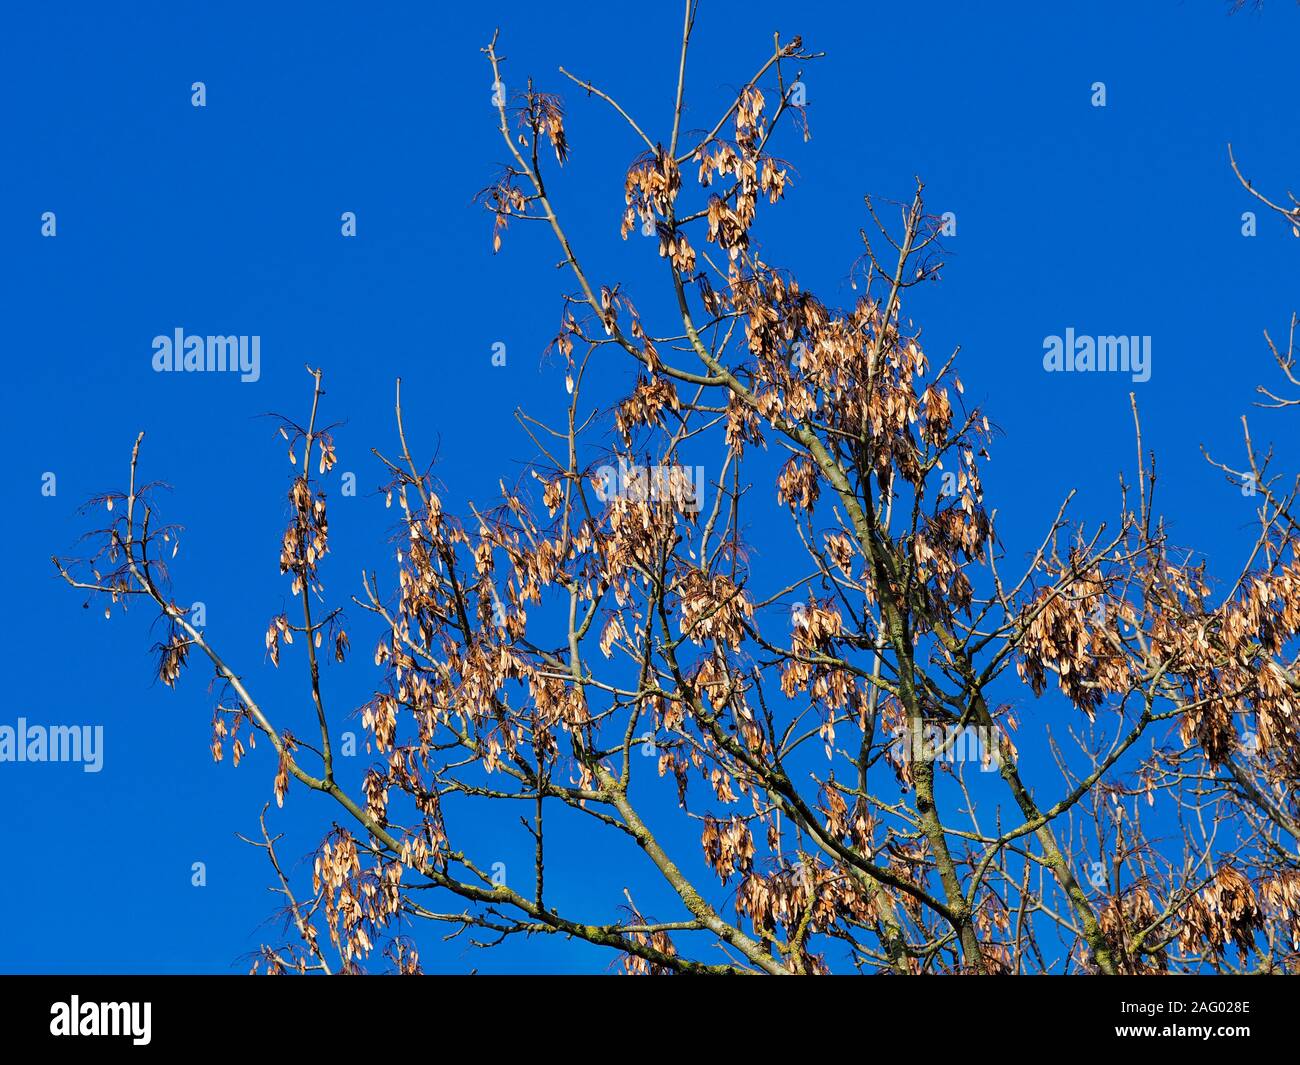 Ash keys on the branches of an ash tree in golden winter light against a clear blue sky Stock Photo